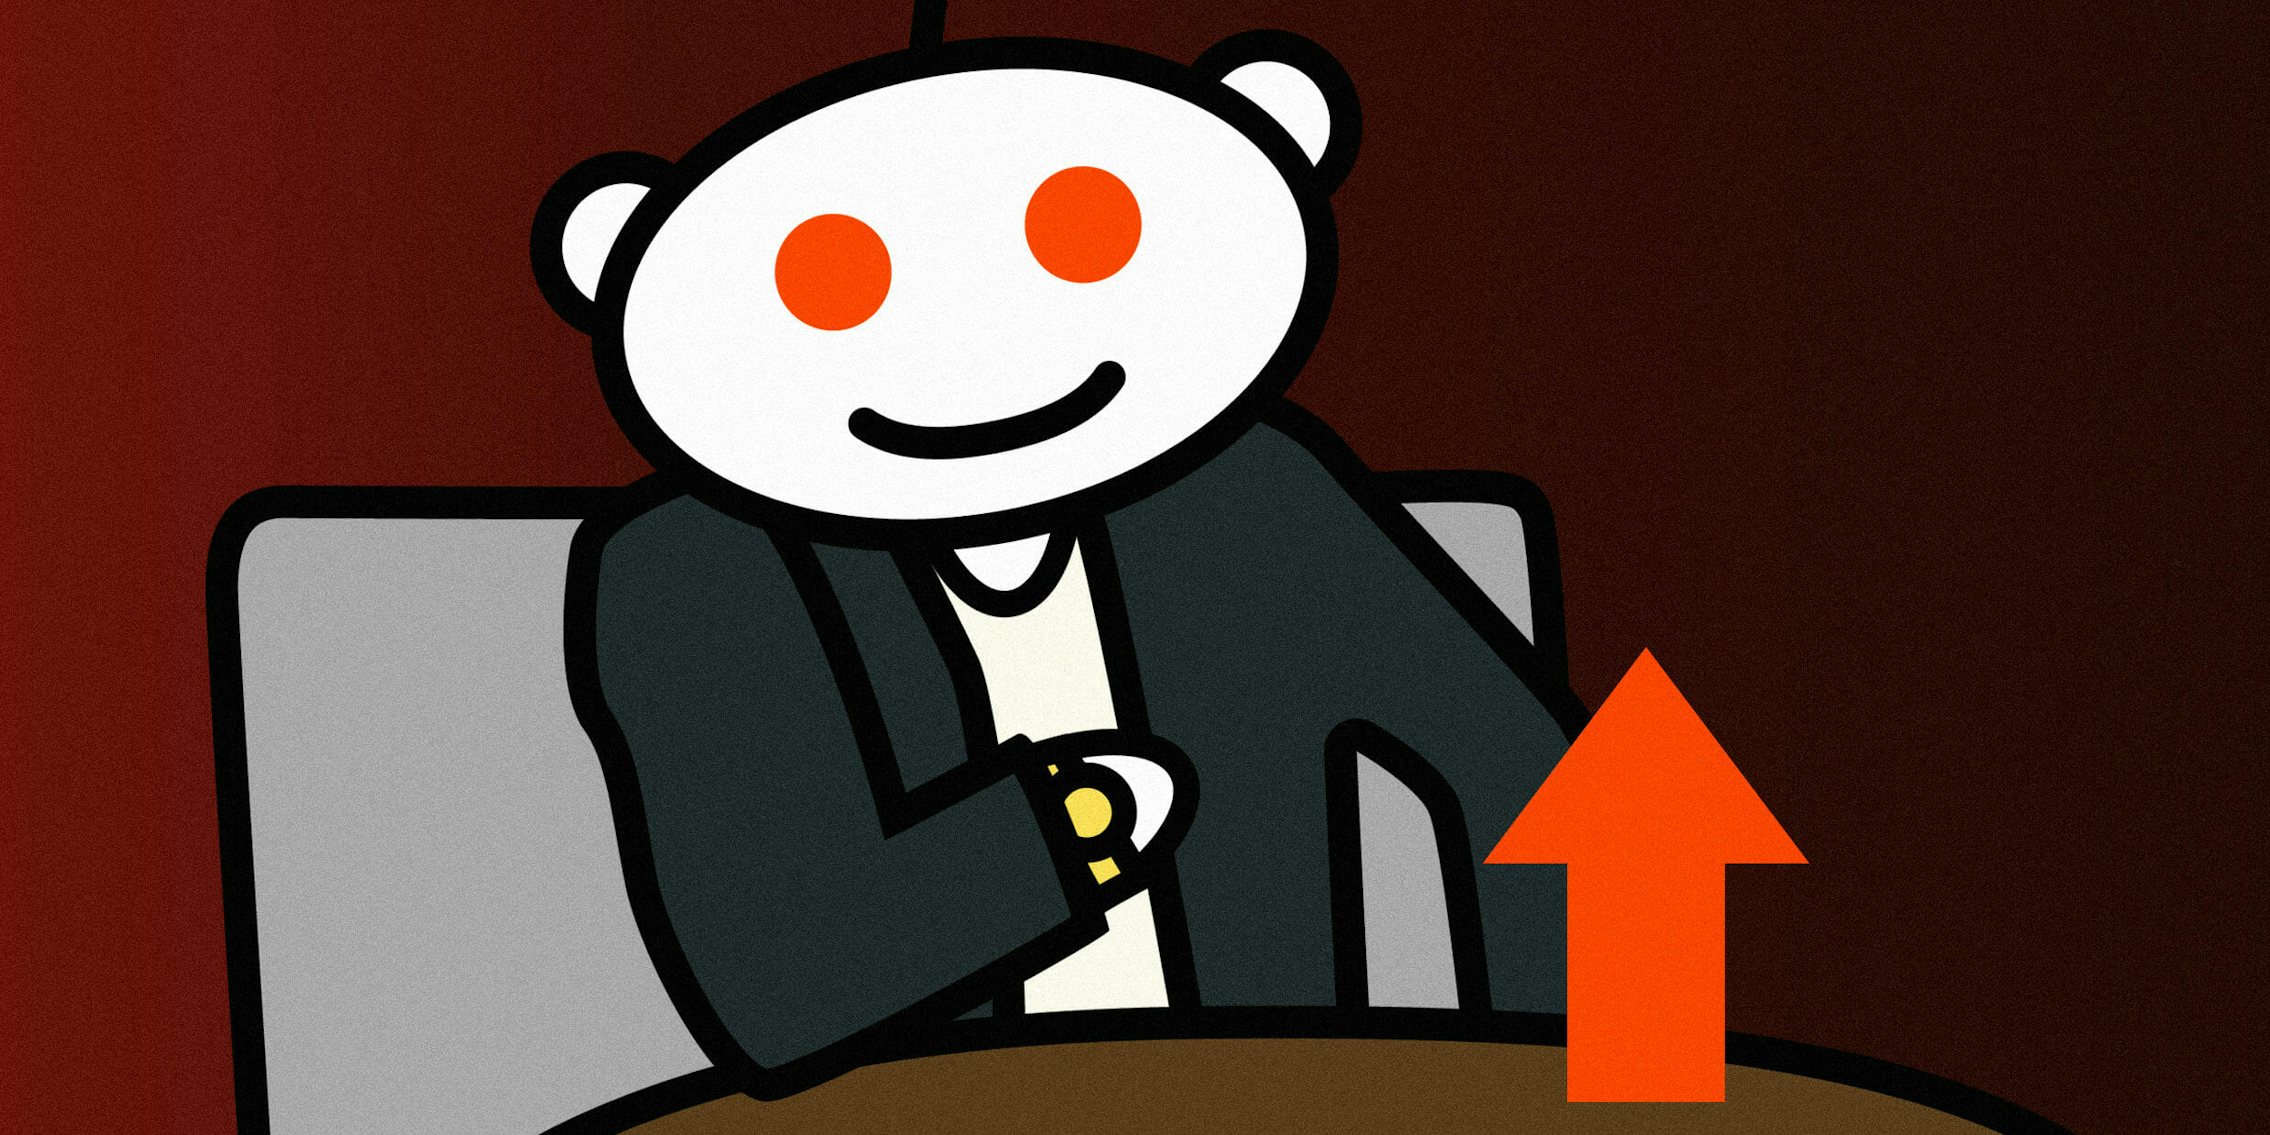 Reddit Snoo as 'The Most Interesting Man In The World'